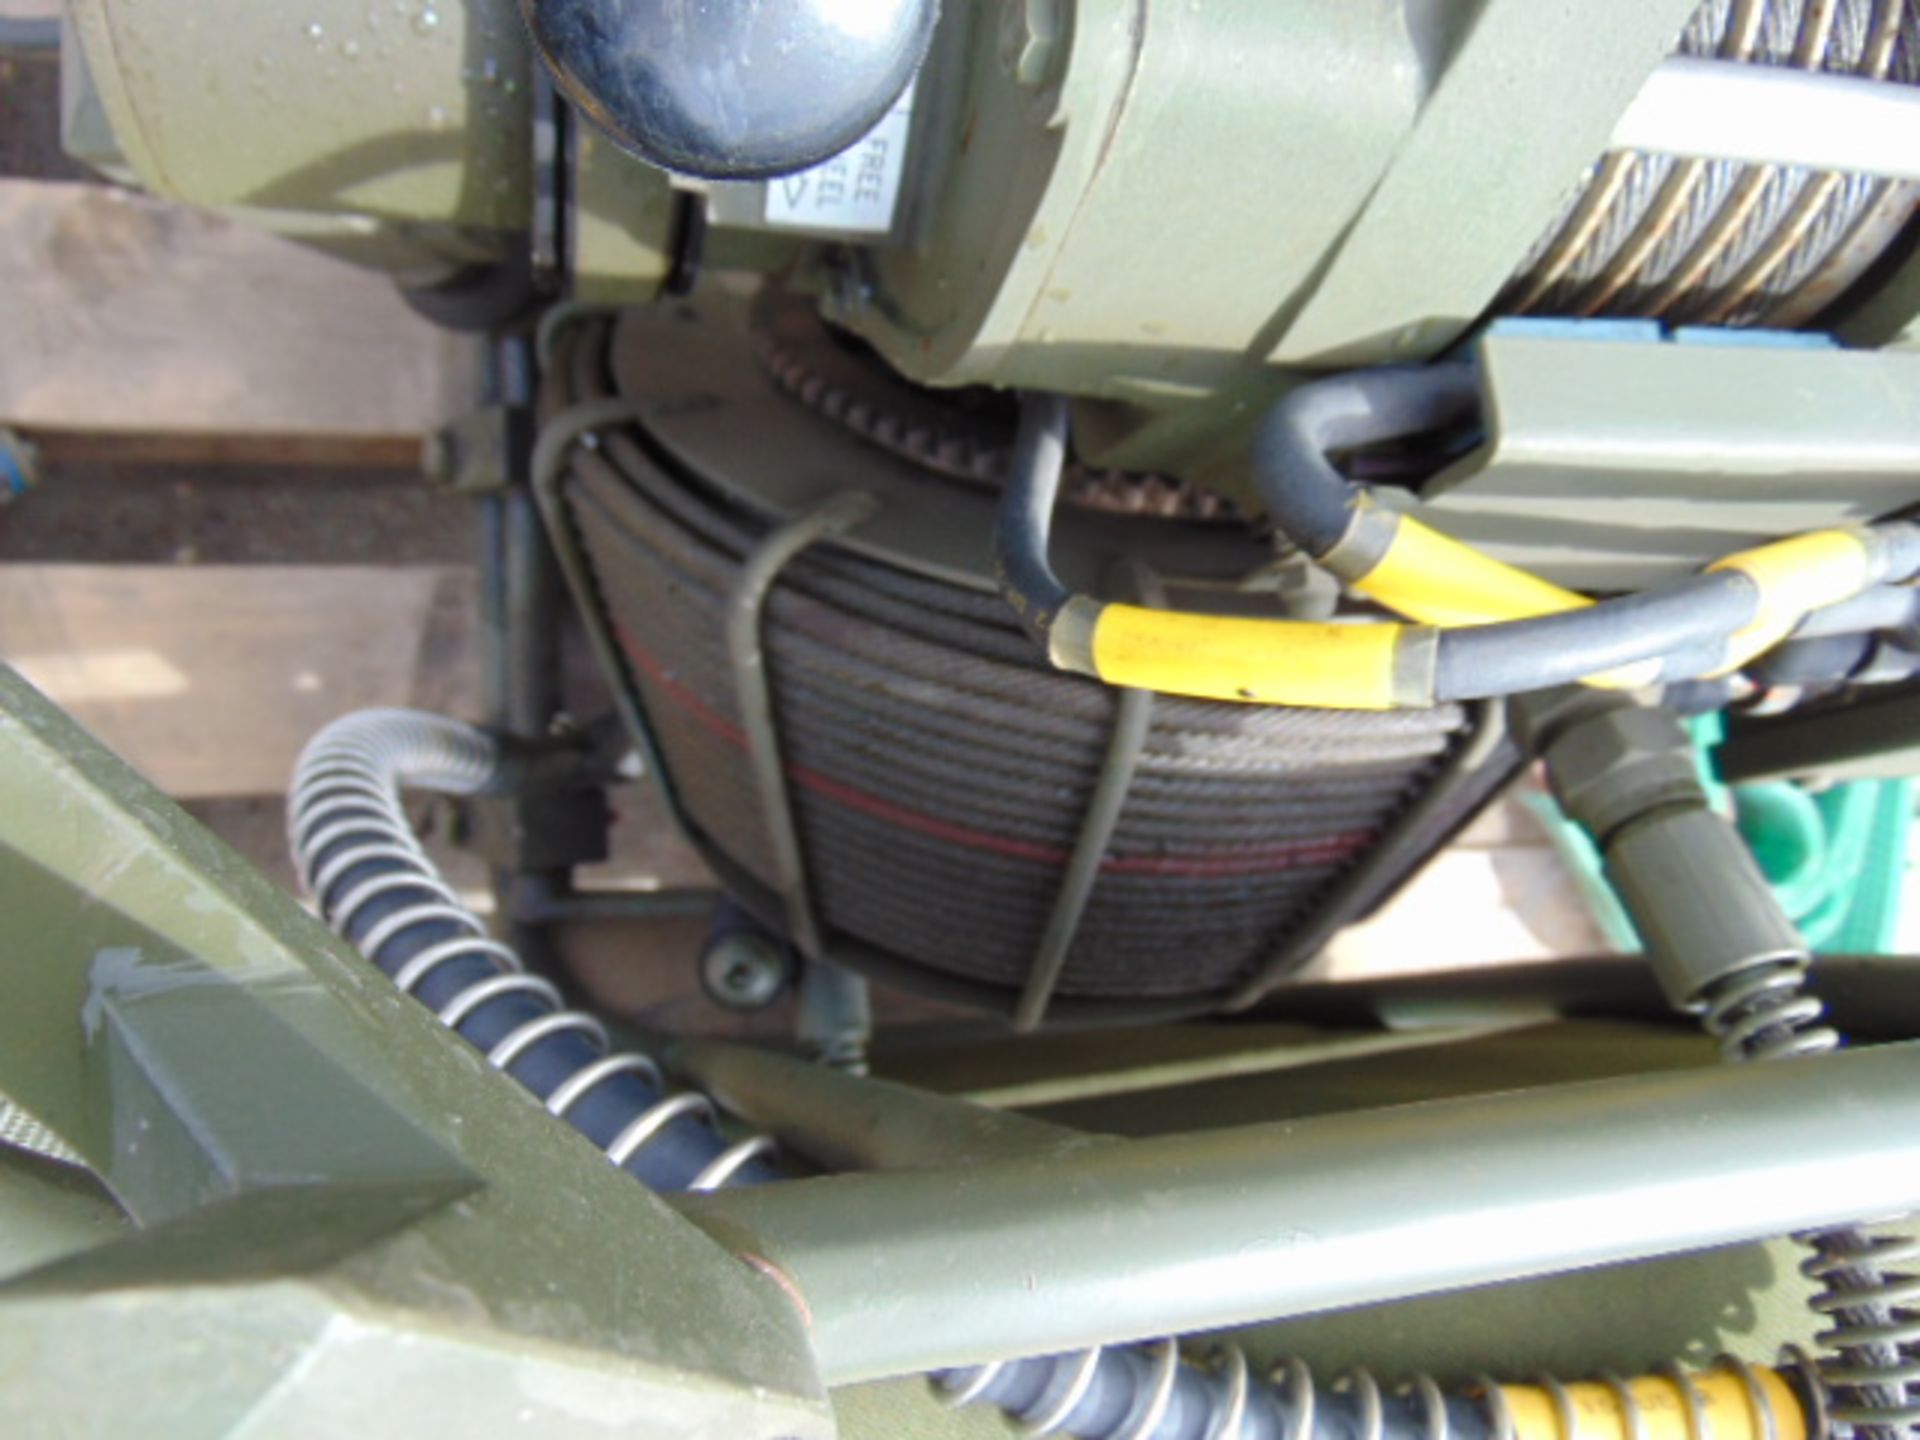 Unissued Demountable Recovery Winch Assembly c/w remote control and accessories from the UK MOD. - Image 5 of 8